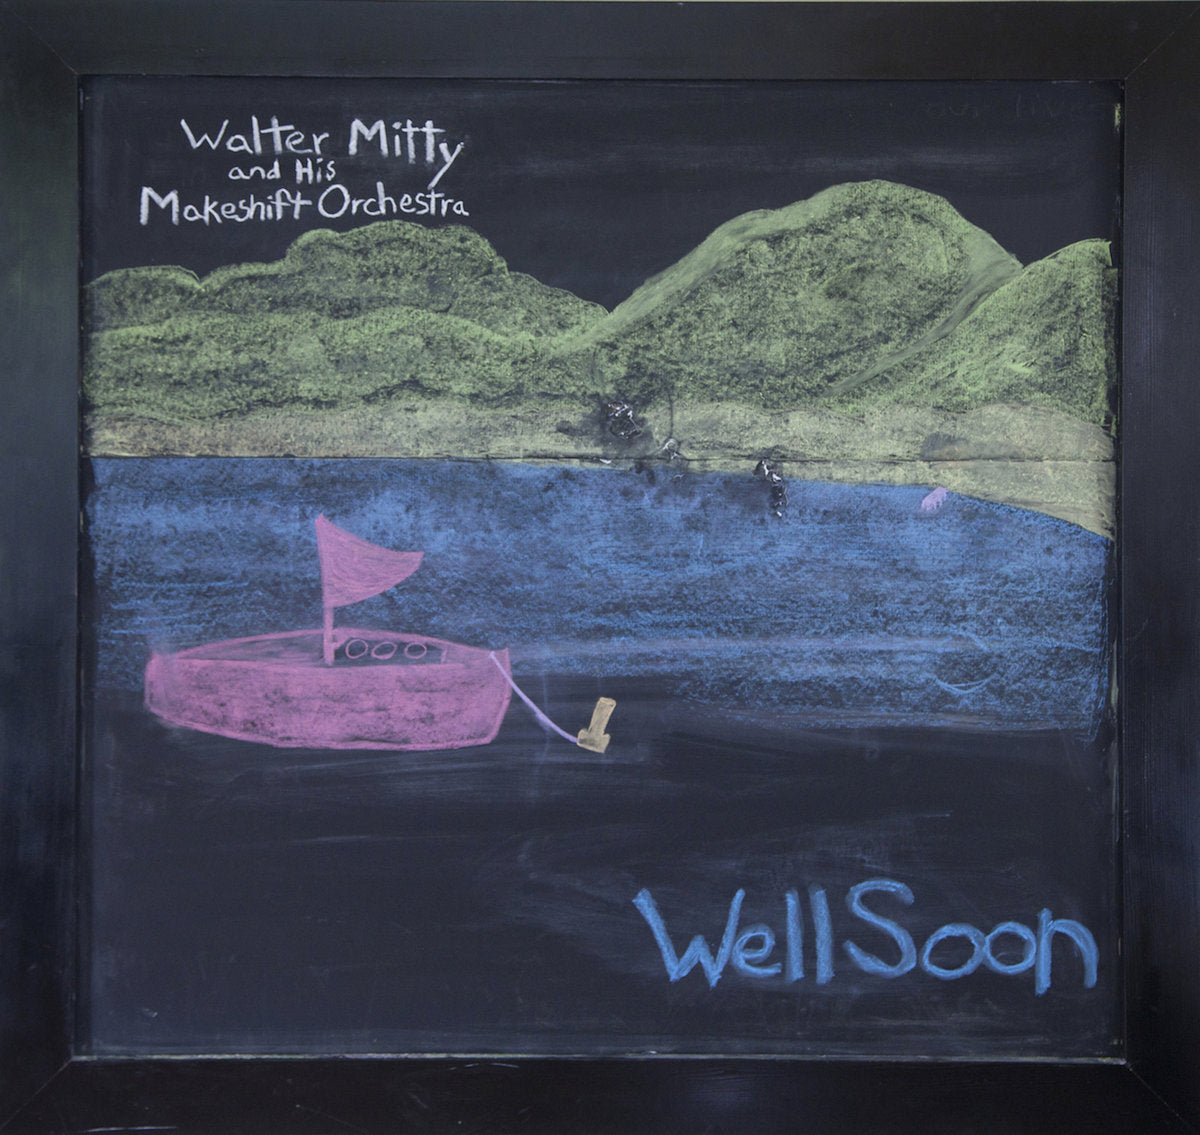 Walter Mitty and His Makeshift Orchestra "Well Soon" LP